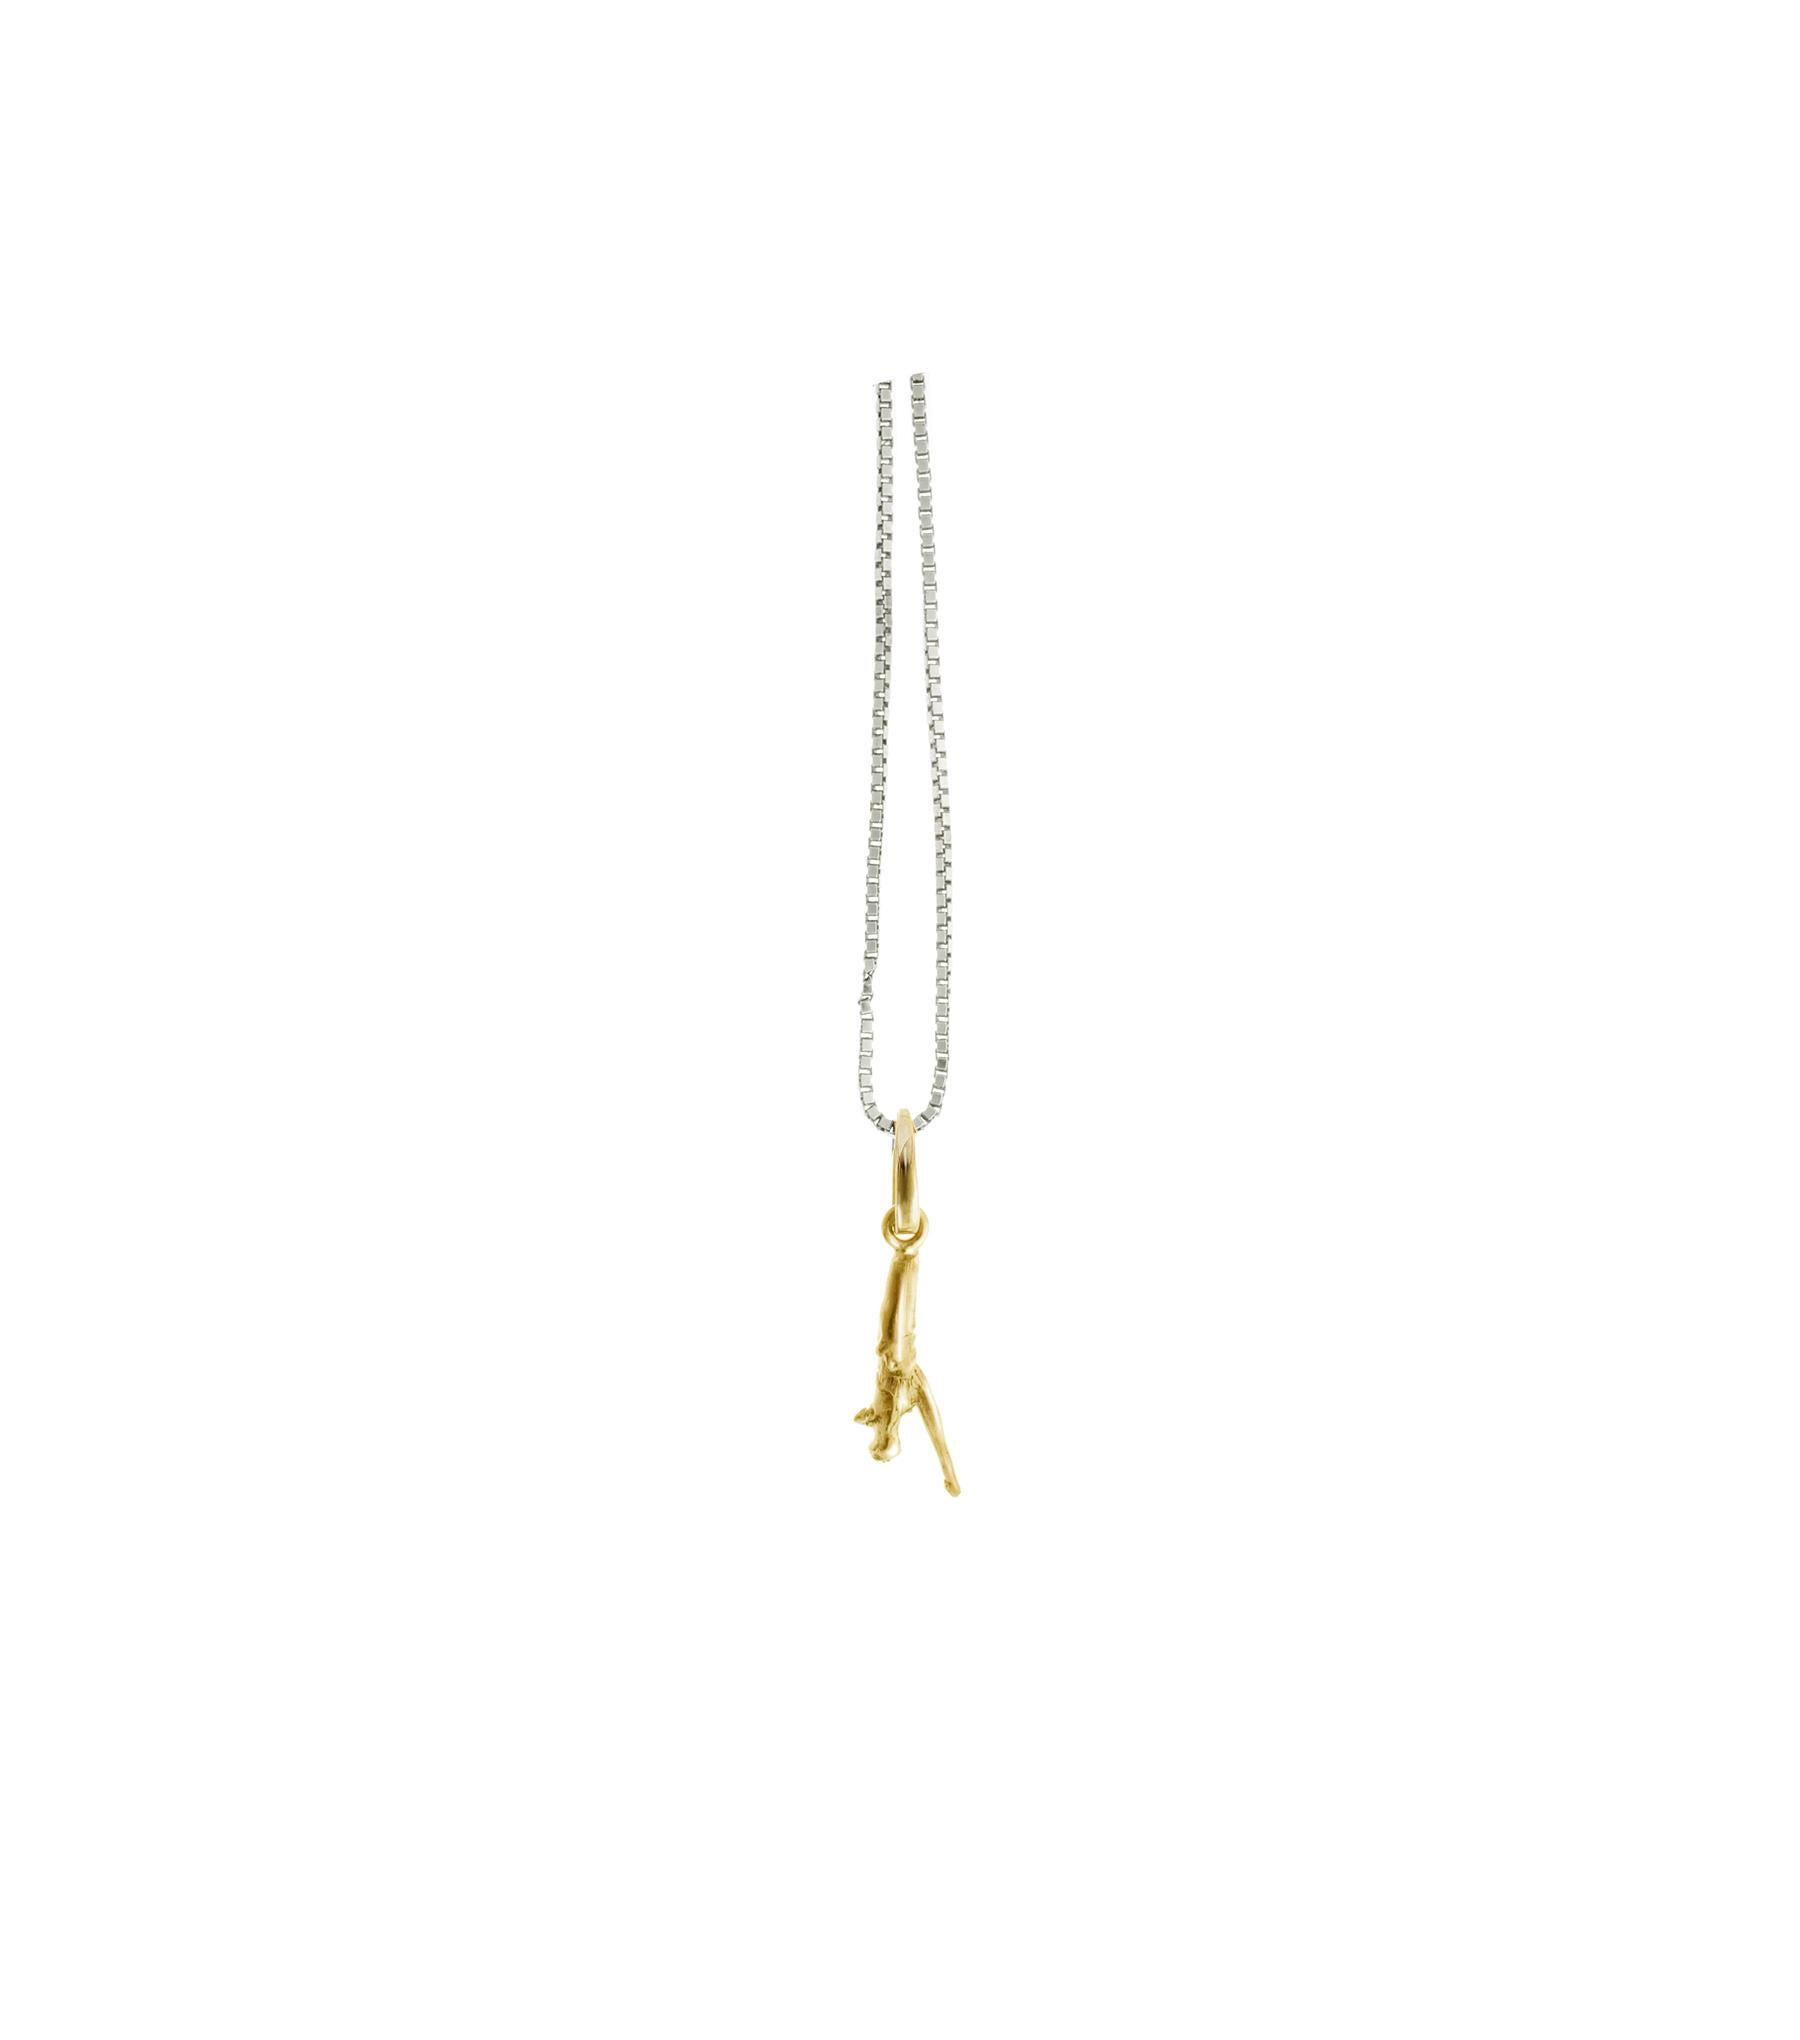 This Tea Twig Chainka pendant is a delicate and unique piece of jewelry made by artist Polya Medvedeva. The design was inspired by a small tea leaf that fell into the artist's cup during a tea ceremony. Chainka is the word for tiny tea leaves and